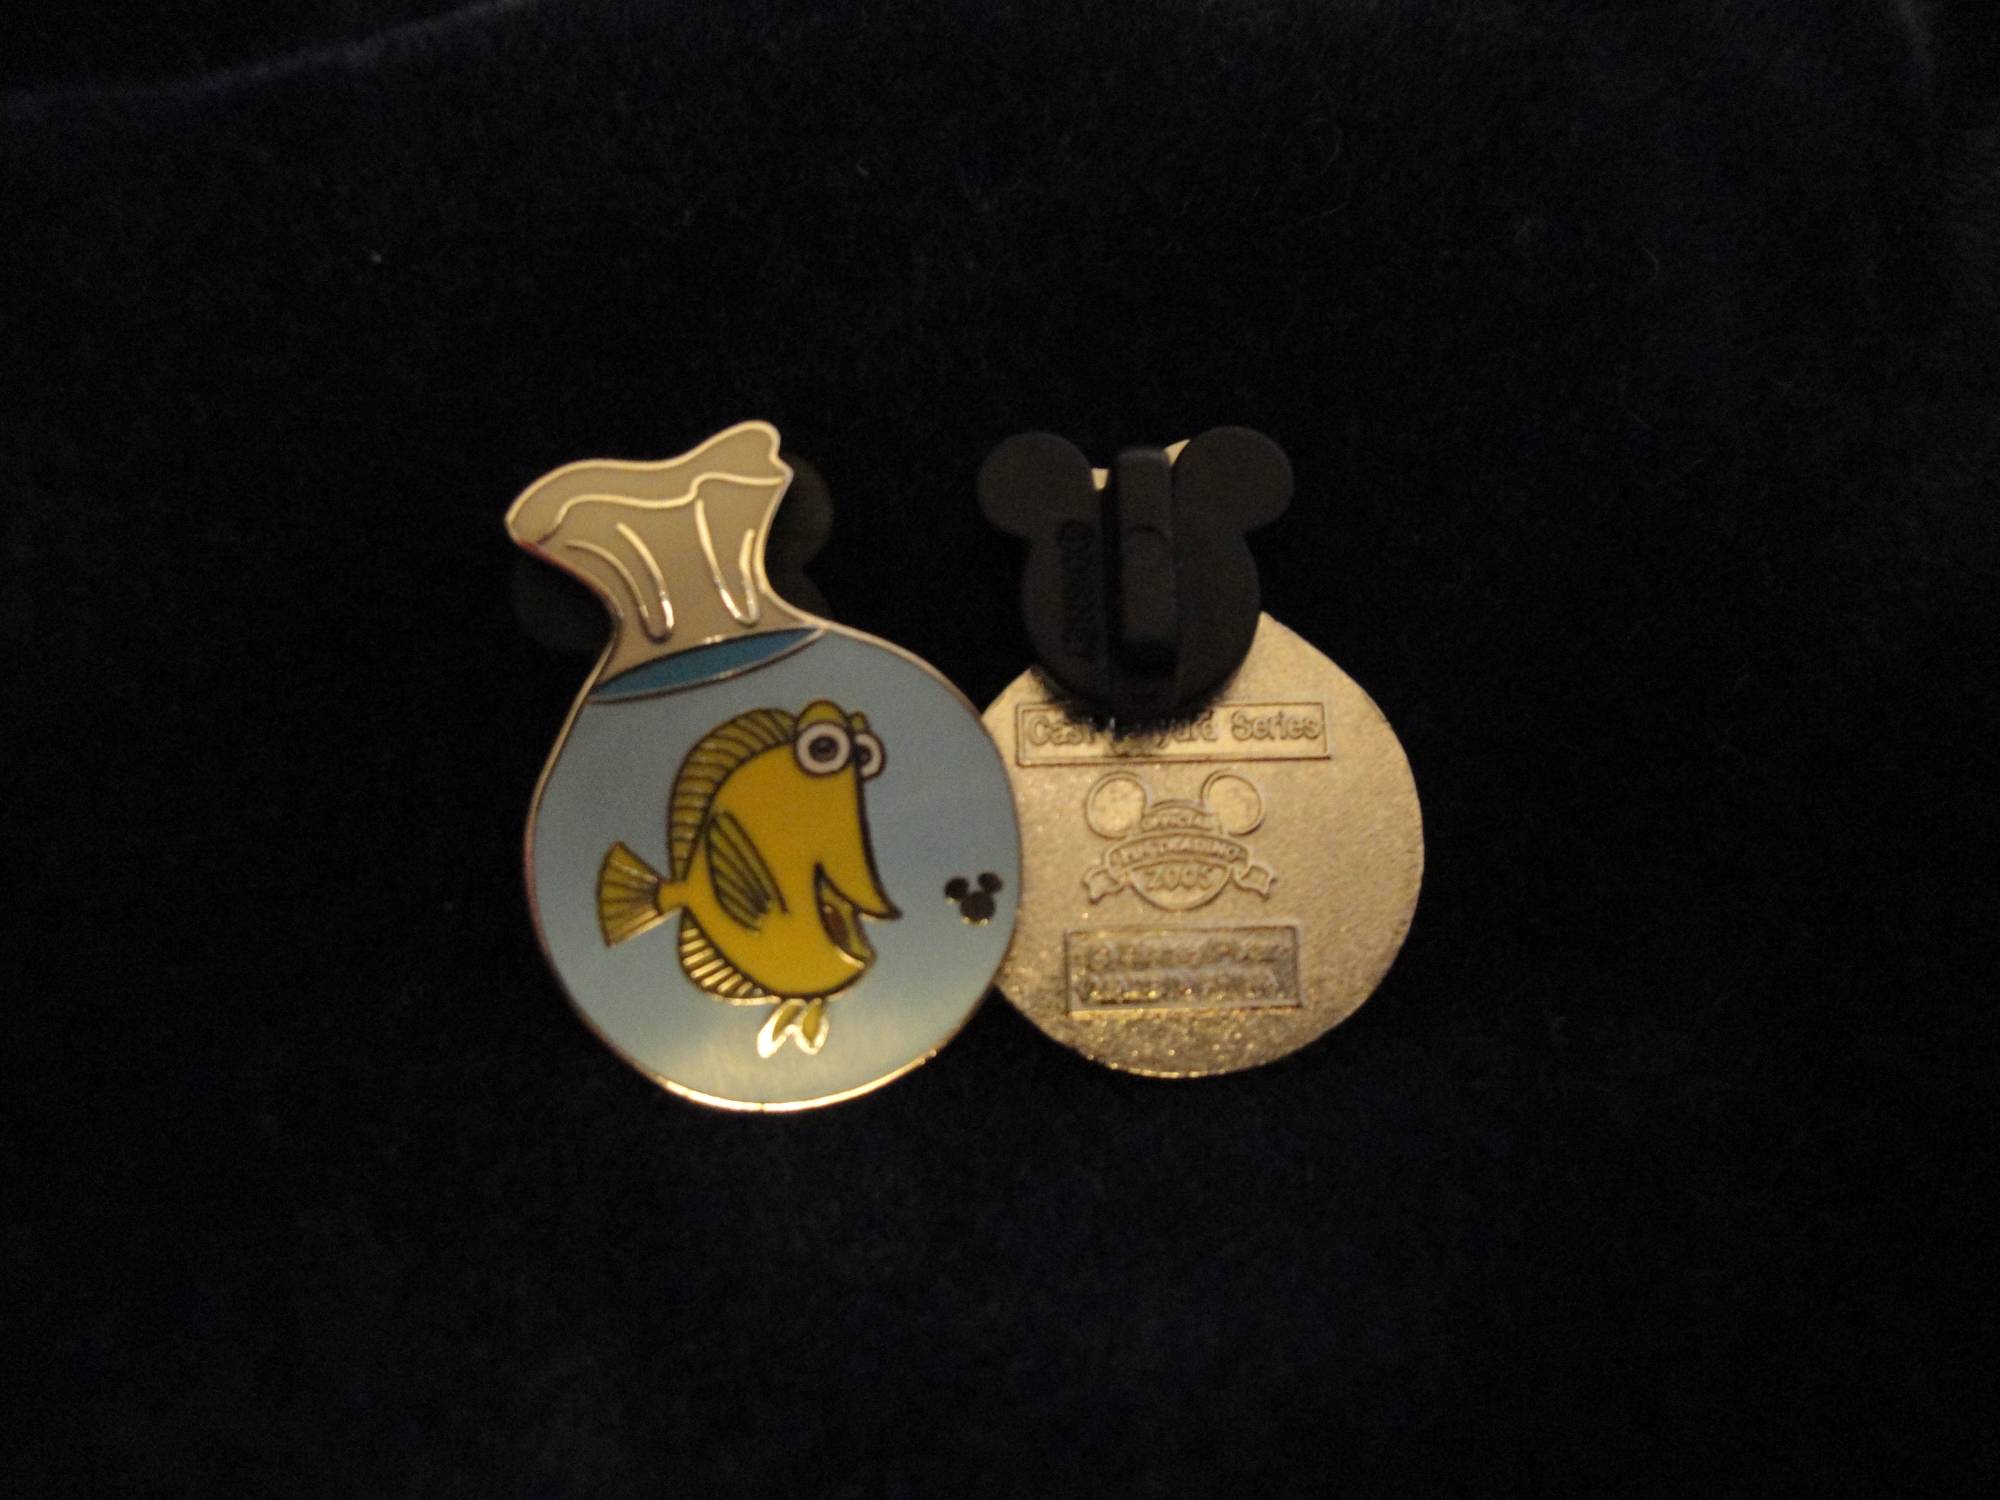 Learn all about Pin Trading at Disney! |PassPorter.com